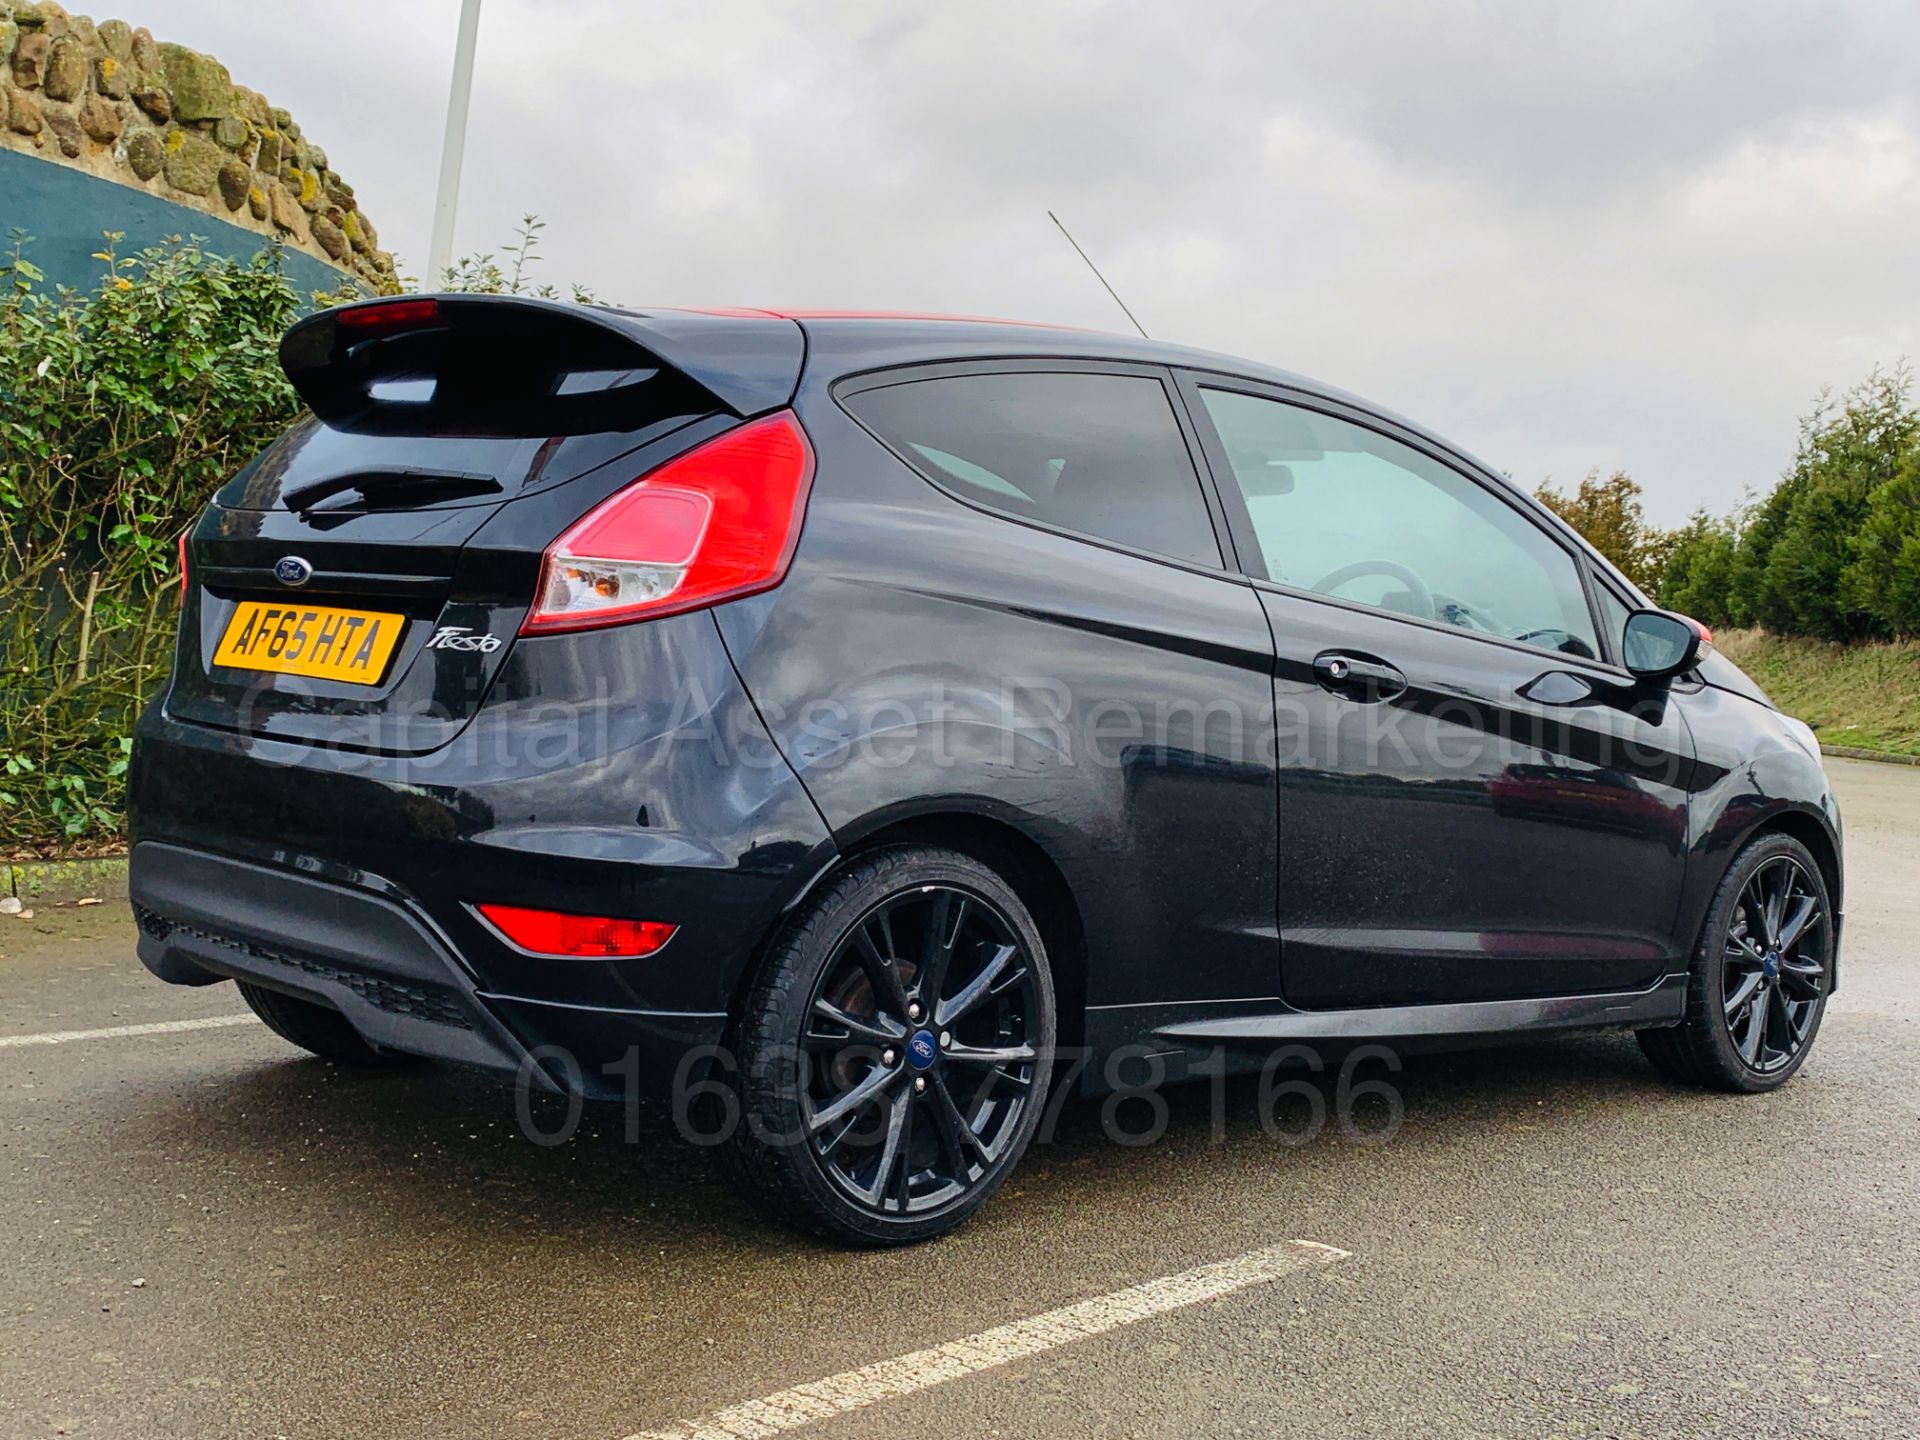 (On Sale) FORD FIESTA *ZETEC S - BLACK EDITION* (2016 MODEL) '1.0L ECO-BOOST - 140 BHP' - Image 11 of 45